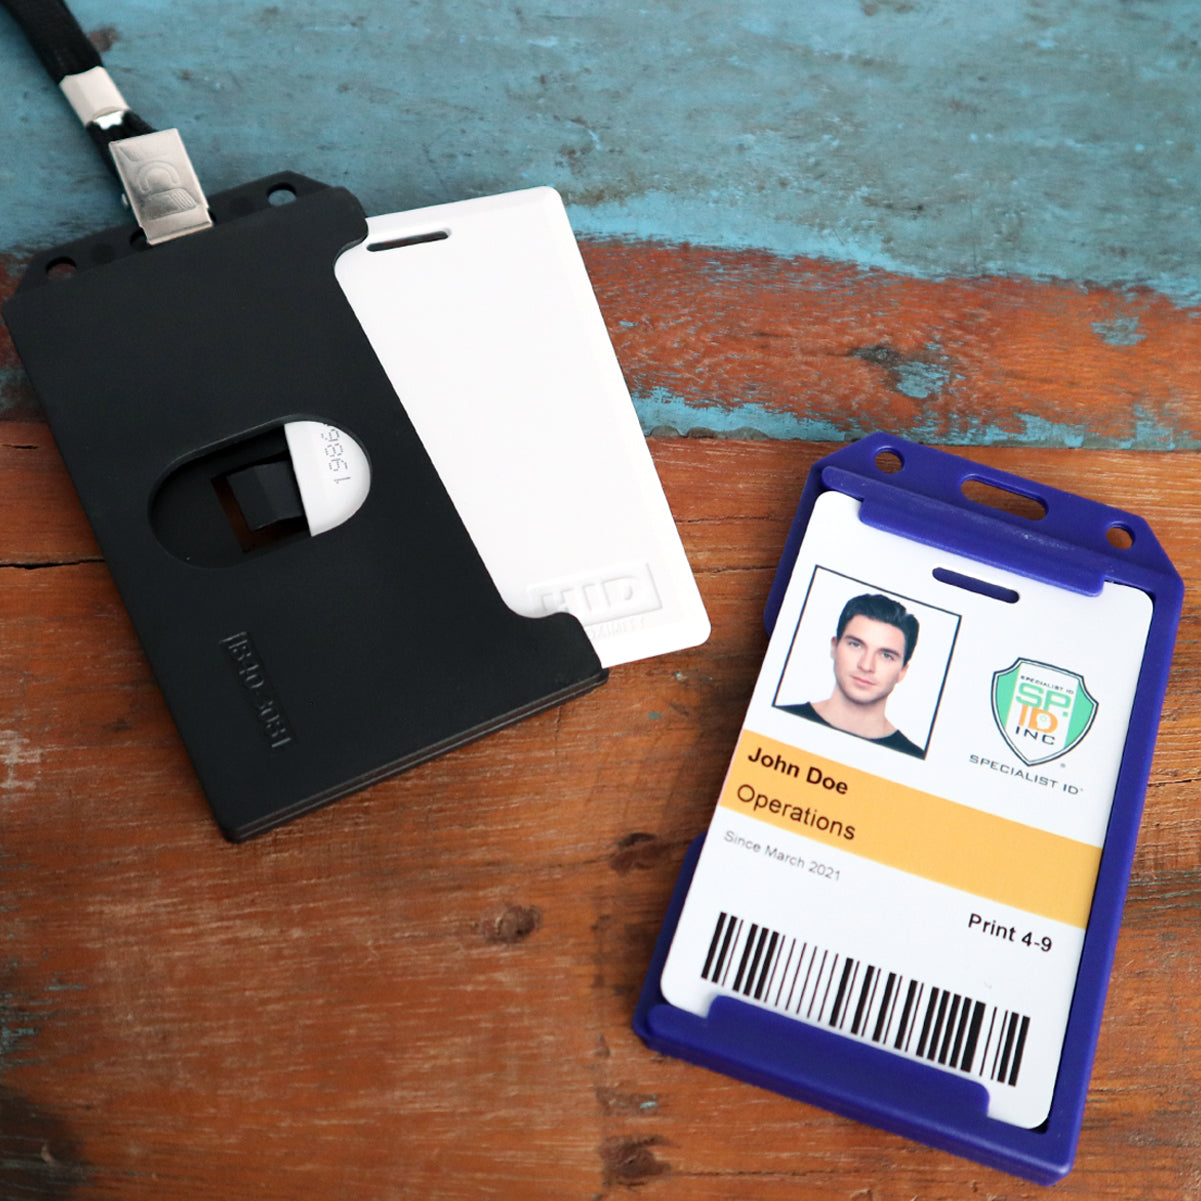 Close-up of two ID badges on a wooden surface. One ID is white in a black rigid plastic holder, and the other badge is inside a purple holder displaying a photo, text "John Doe Operations", and a company logo. The 2 Sided Rigid Vertical MultiCard Badge Holder - Hard Plastic Multiple ID Card Holder (1840-308X) ensures secure placement for multiple essential IDs.